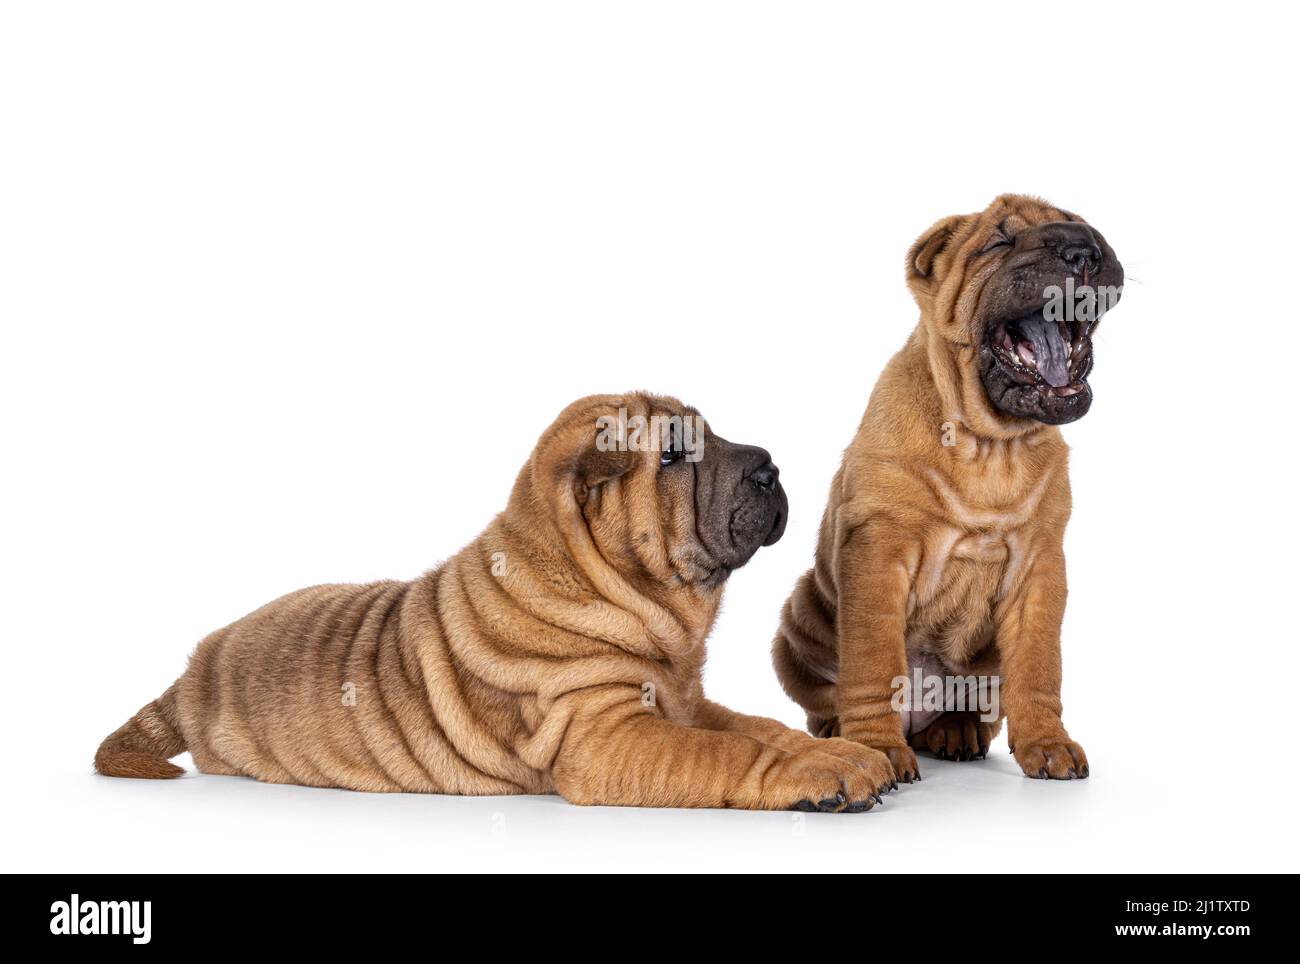 Two adorable Shar-pei dog puppies, sitting  and laying next to each other. One mouth wide open yawning showing the typical blue black tongue. The othe Stock Photo